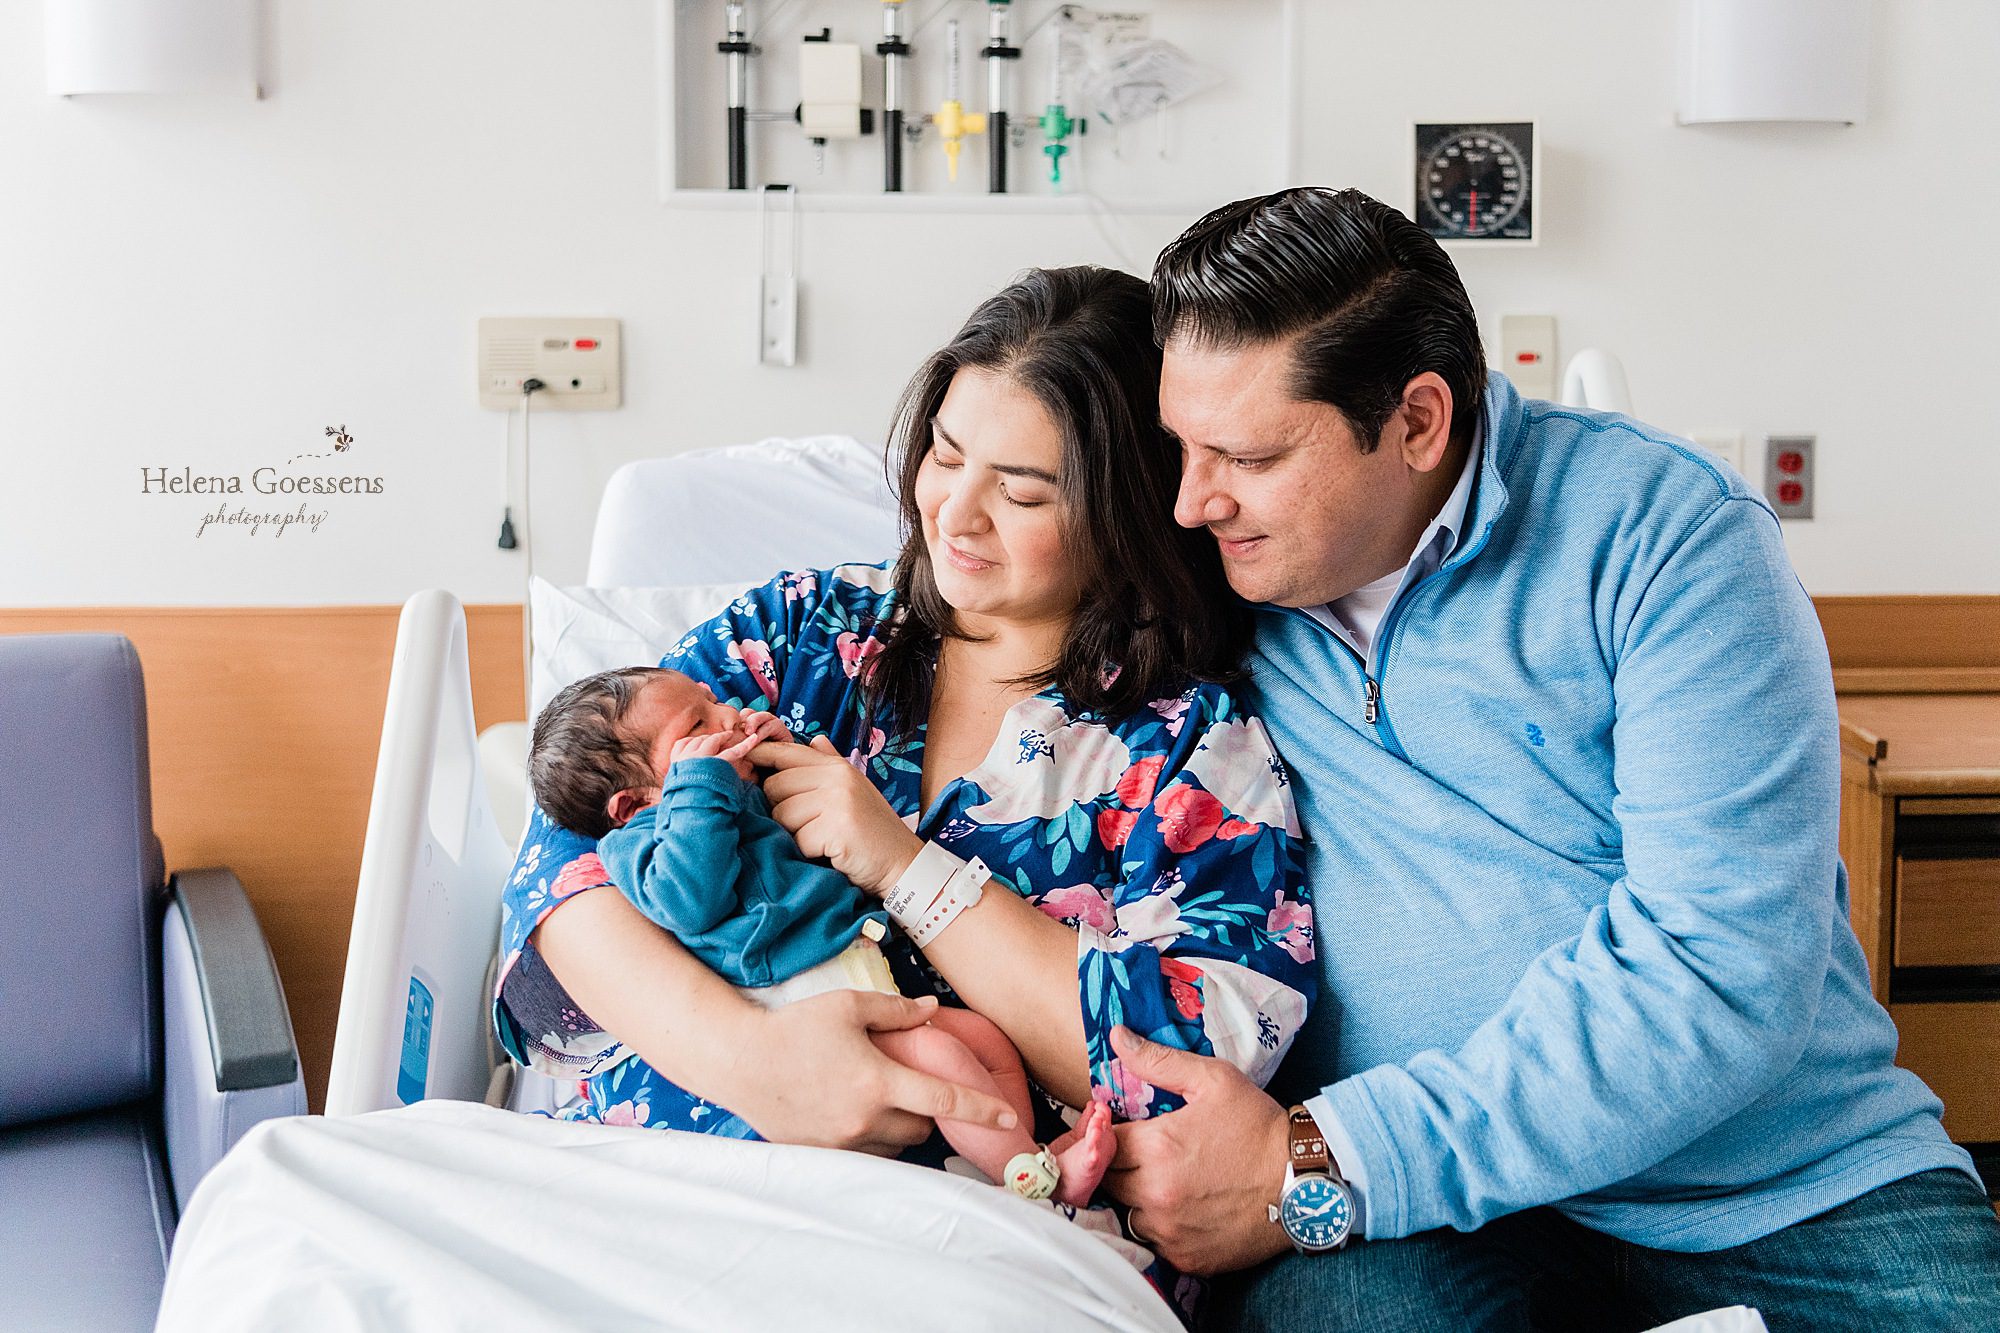 new family photographed during session with Boston newborn photographer Helena Goessens Photography